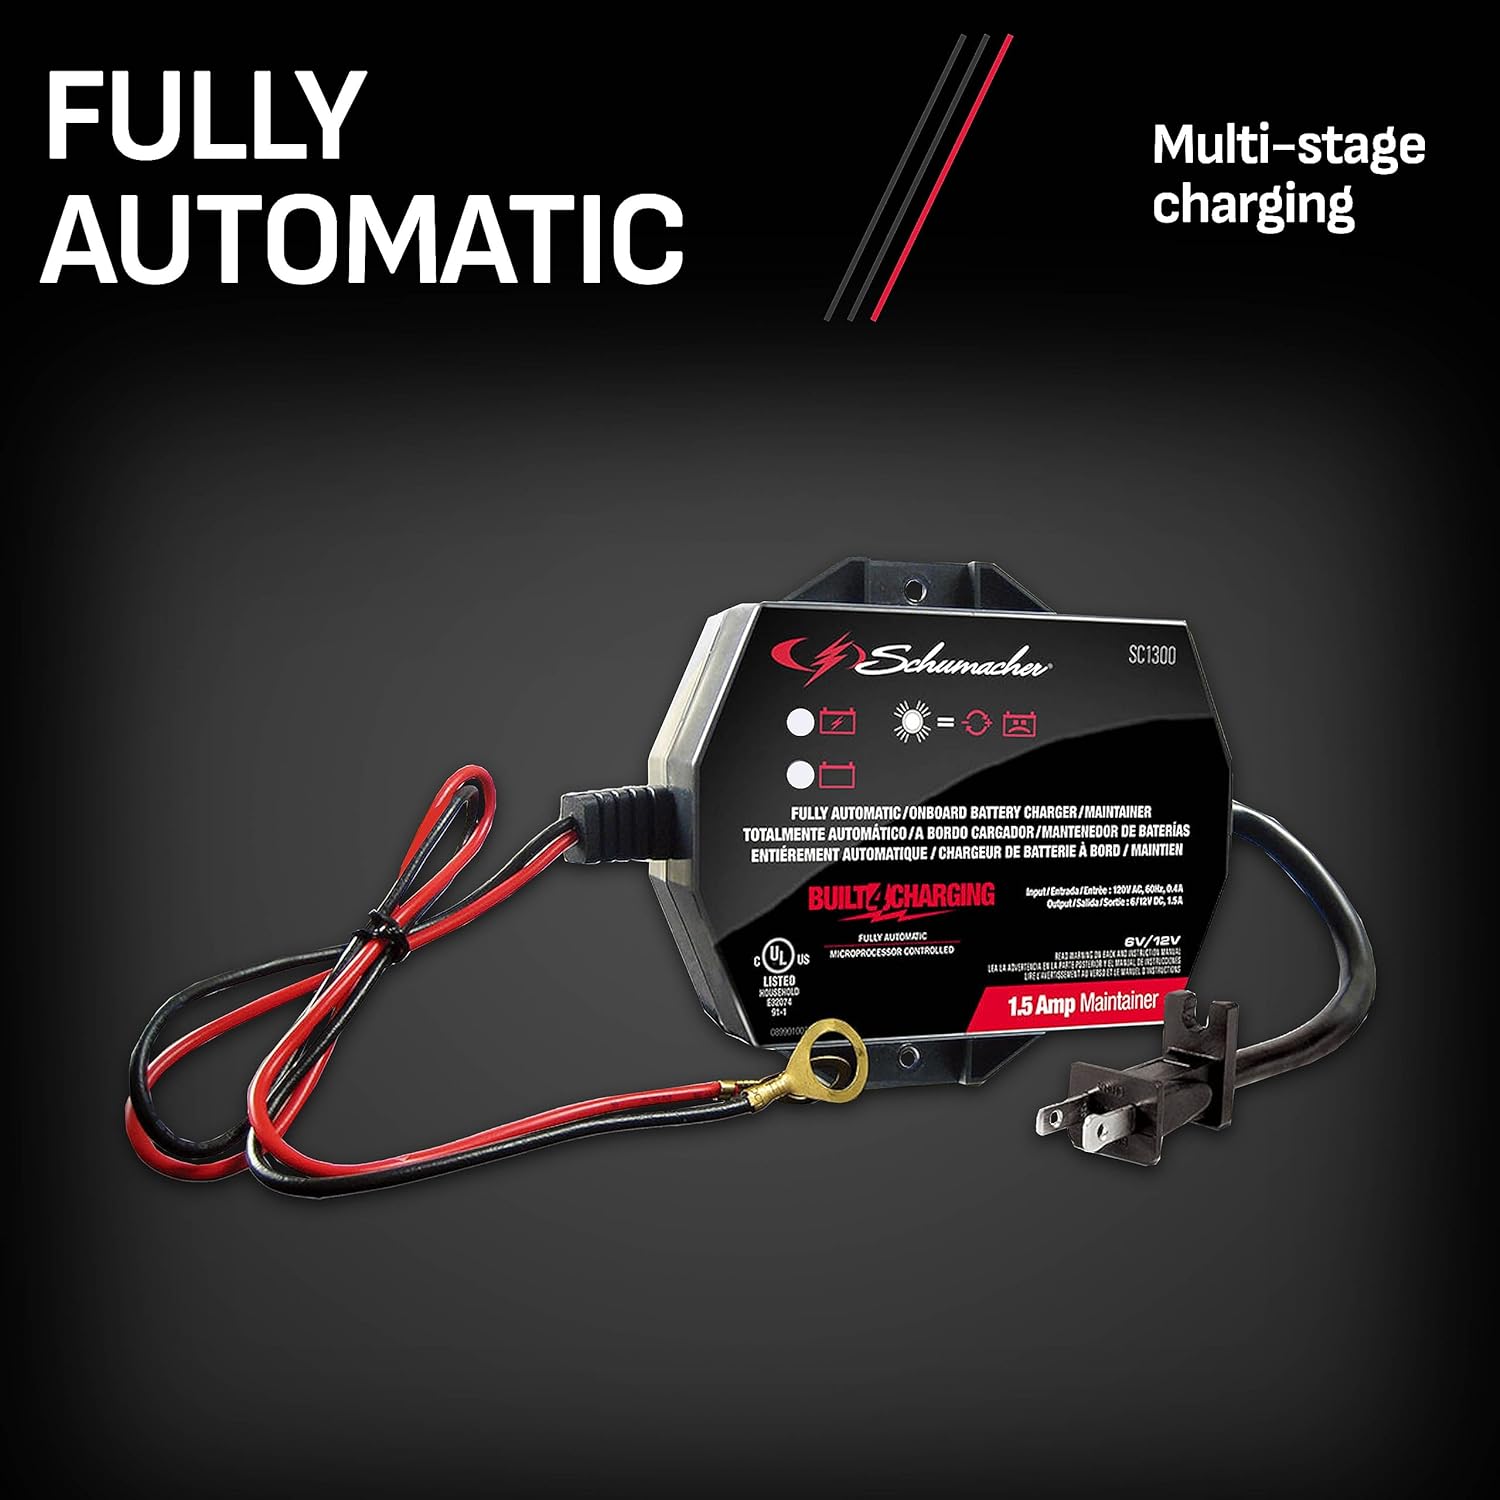 Schumacher SC1300 Fully Automatic Direct-Mount Under-the-Hood Battery Charger/Maintainer with Battery Detection - 1.5 Amp, 6V/12V - for Cars, Motorcycles, Lawn Tractors, Power Sports - Schumacher SC1300 Battery Charger Review